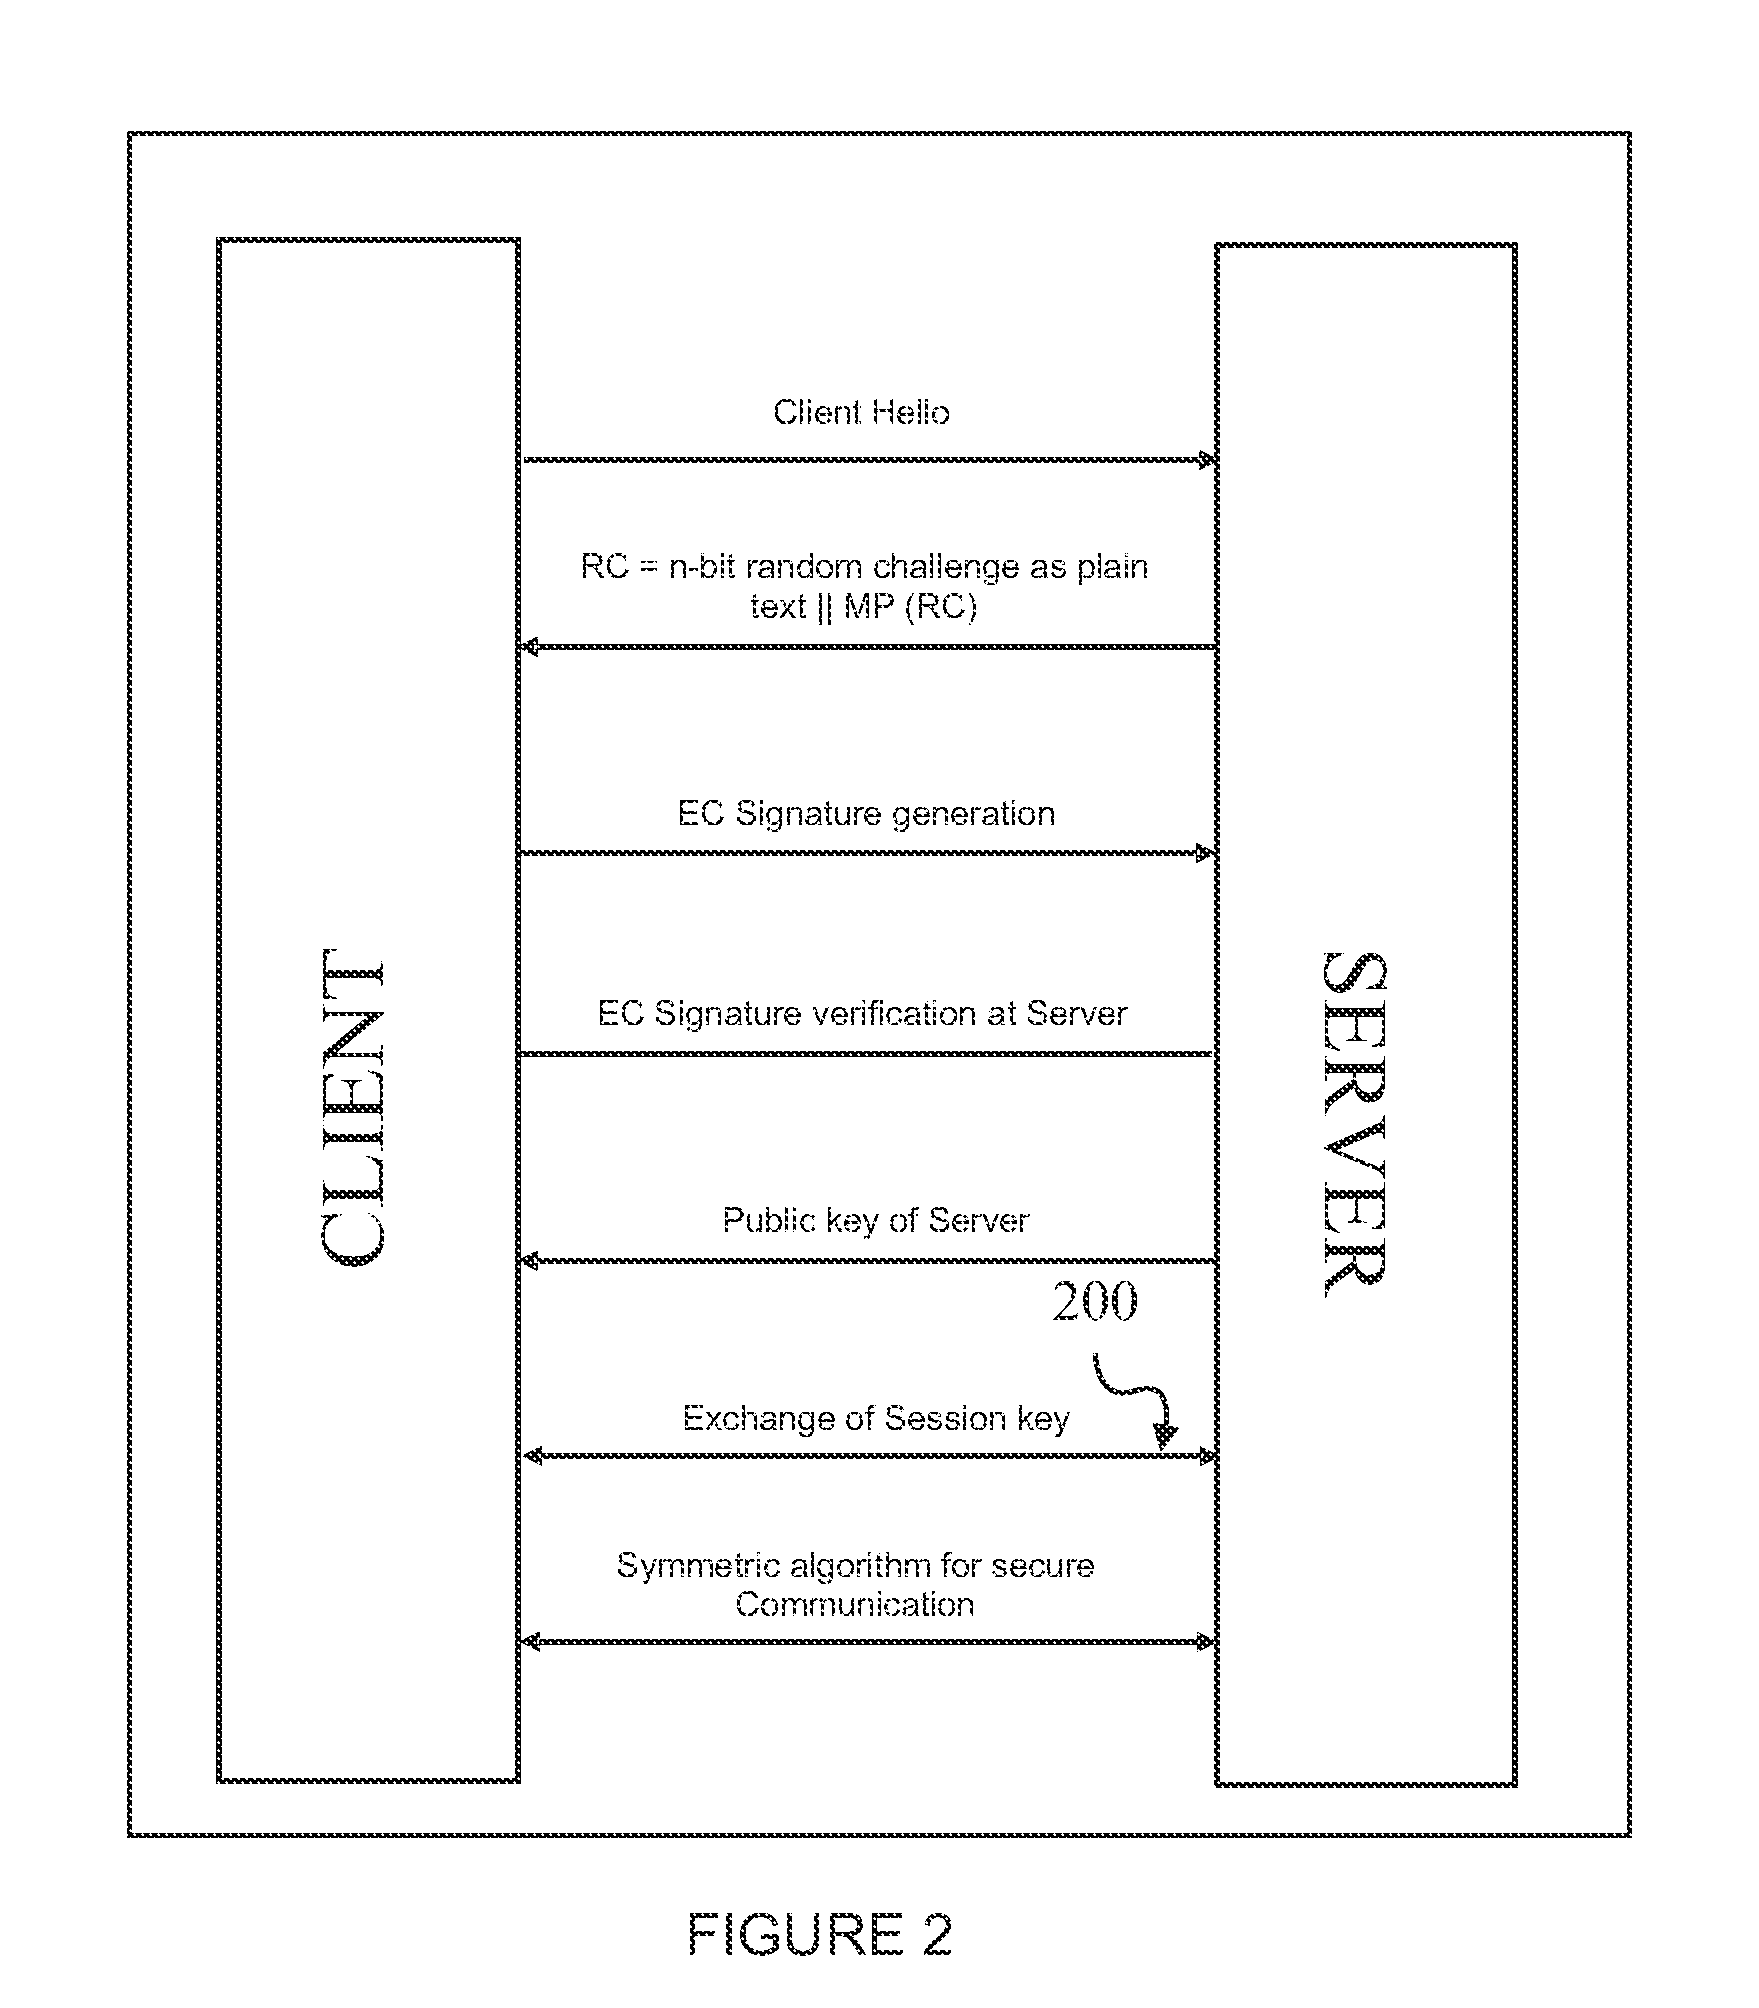 System and method for designing secure client-server communication protocols based on certificateless public key infrastructure